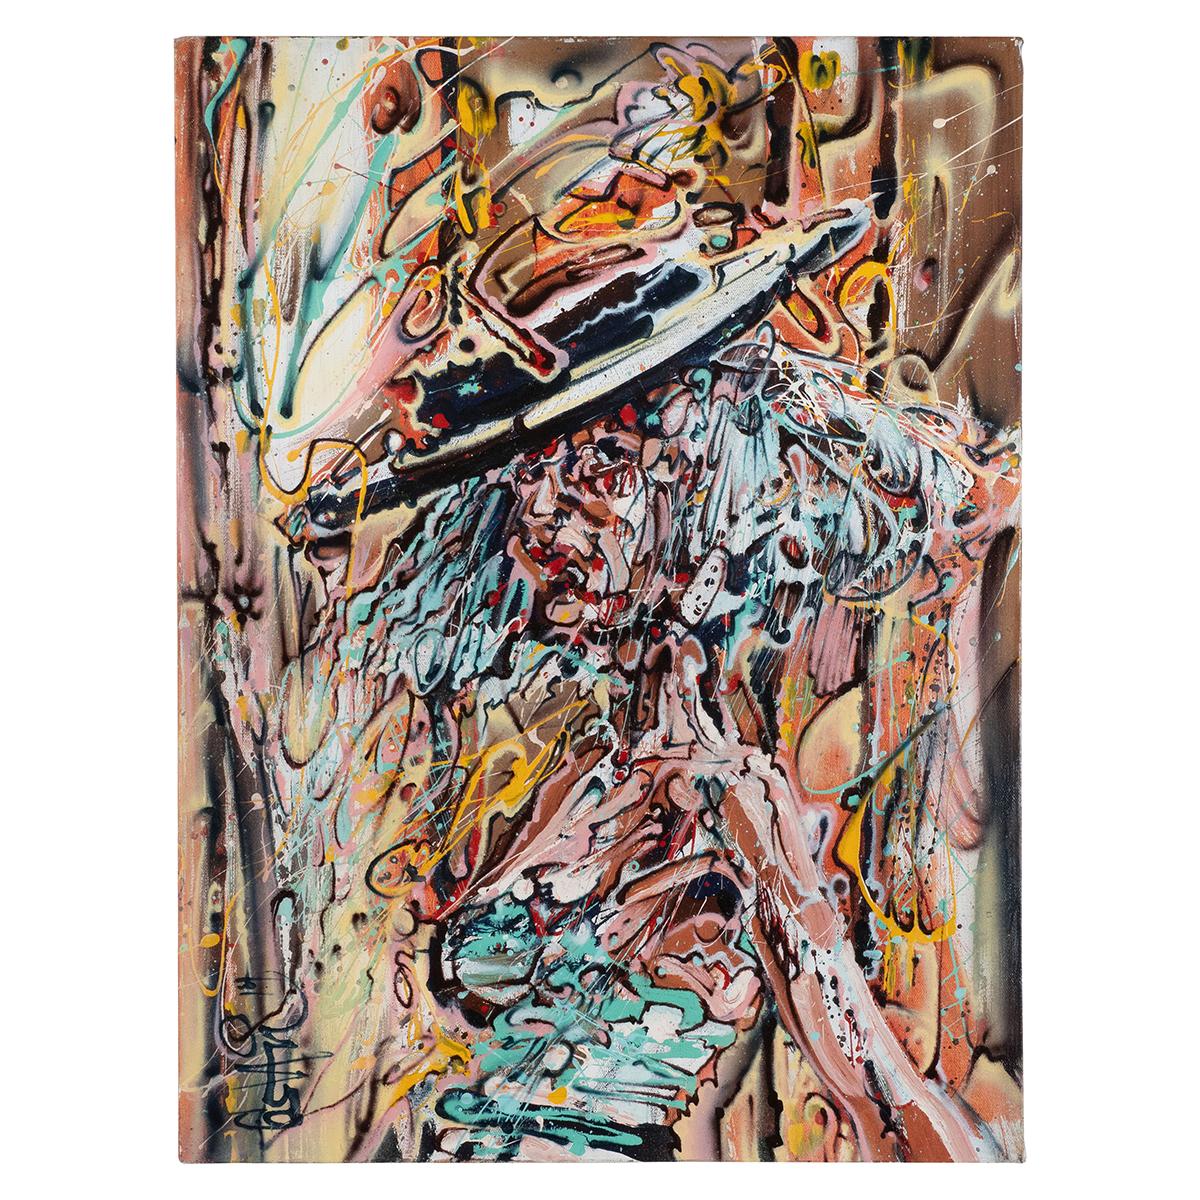 Modern impressionistic portrait of a woman with hat by Costain. Oil on canvas.